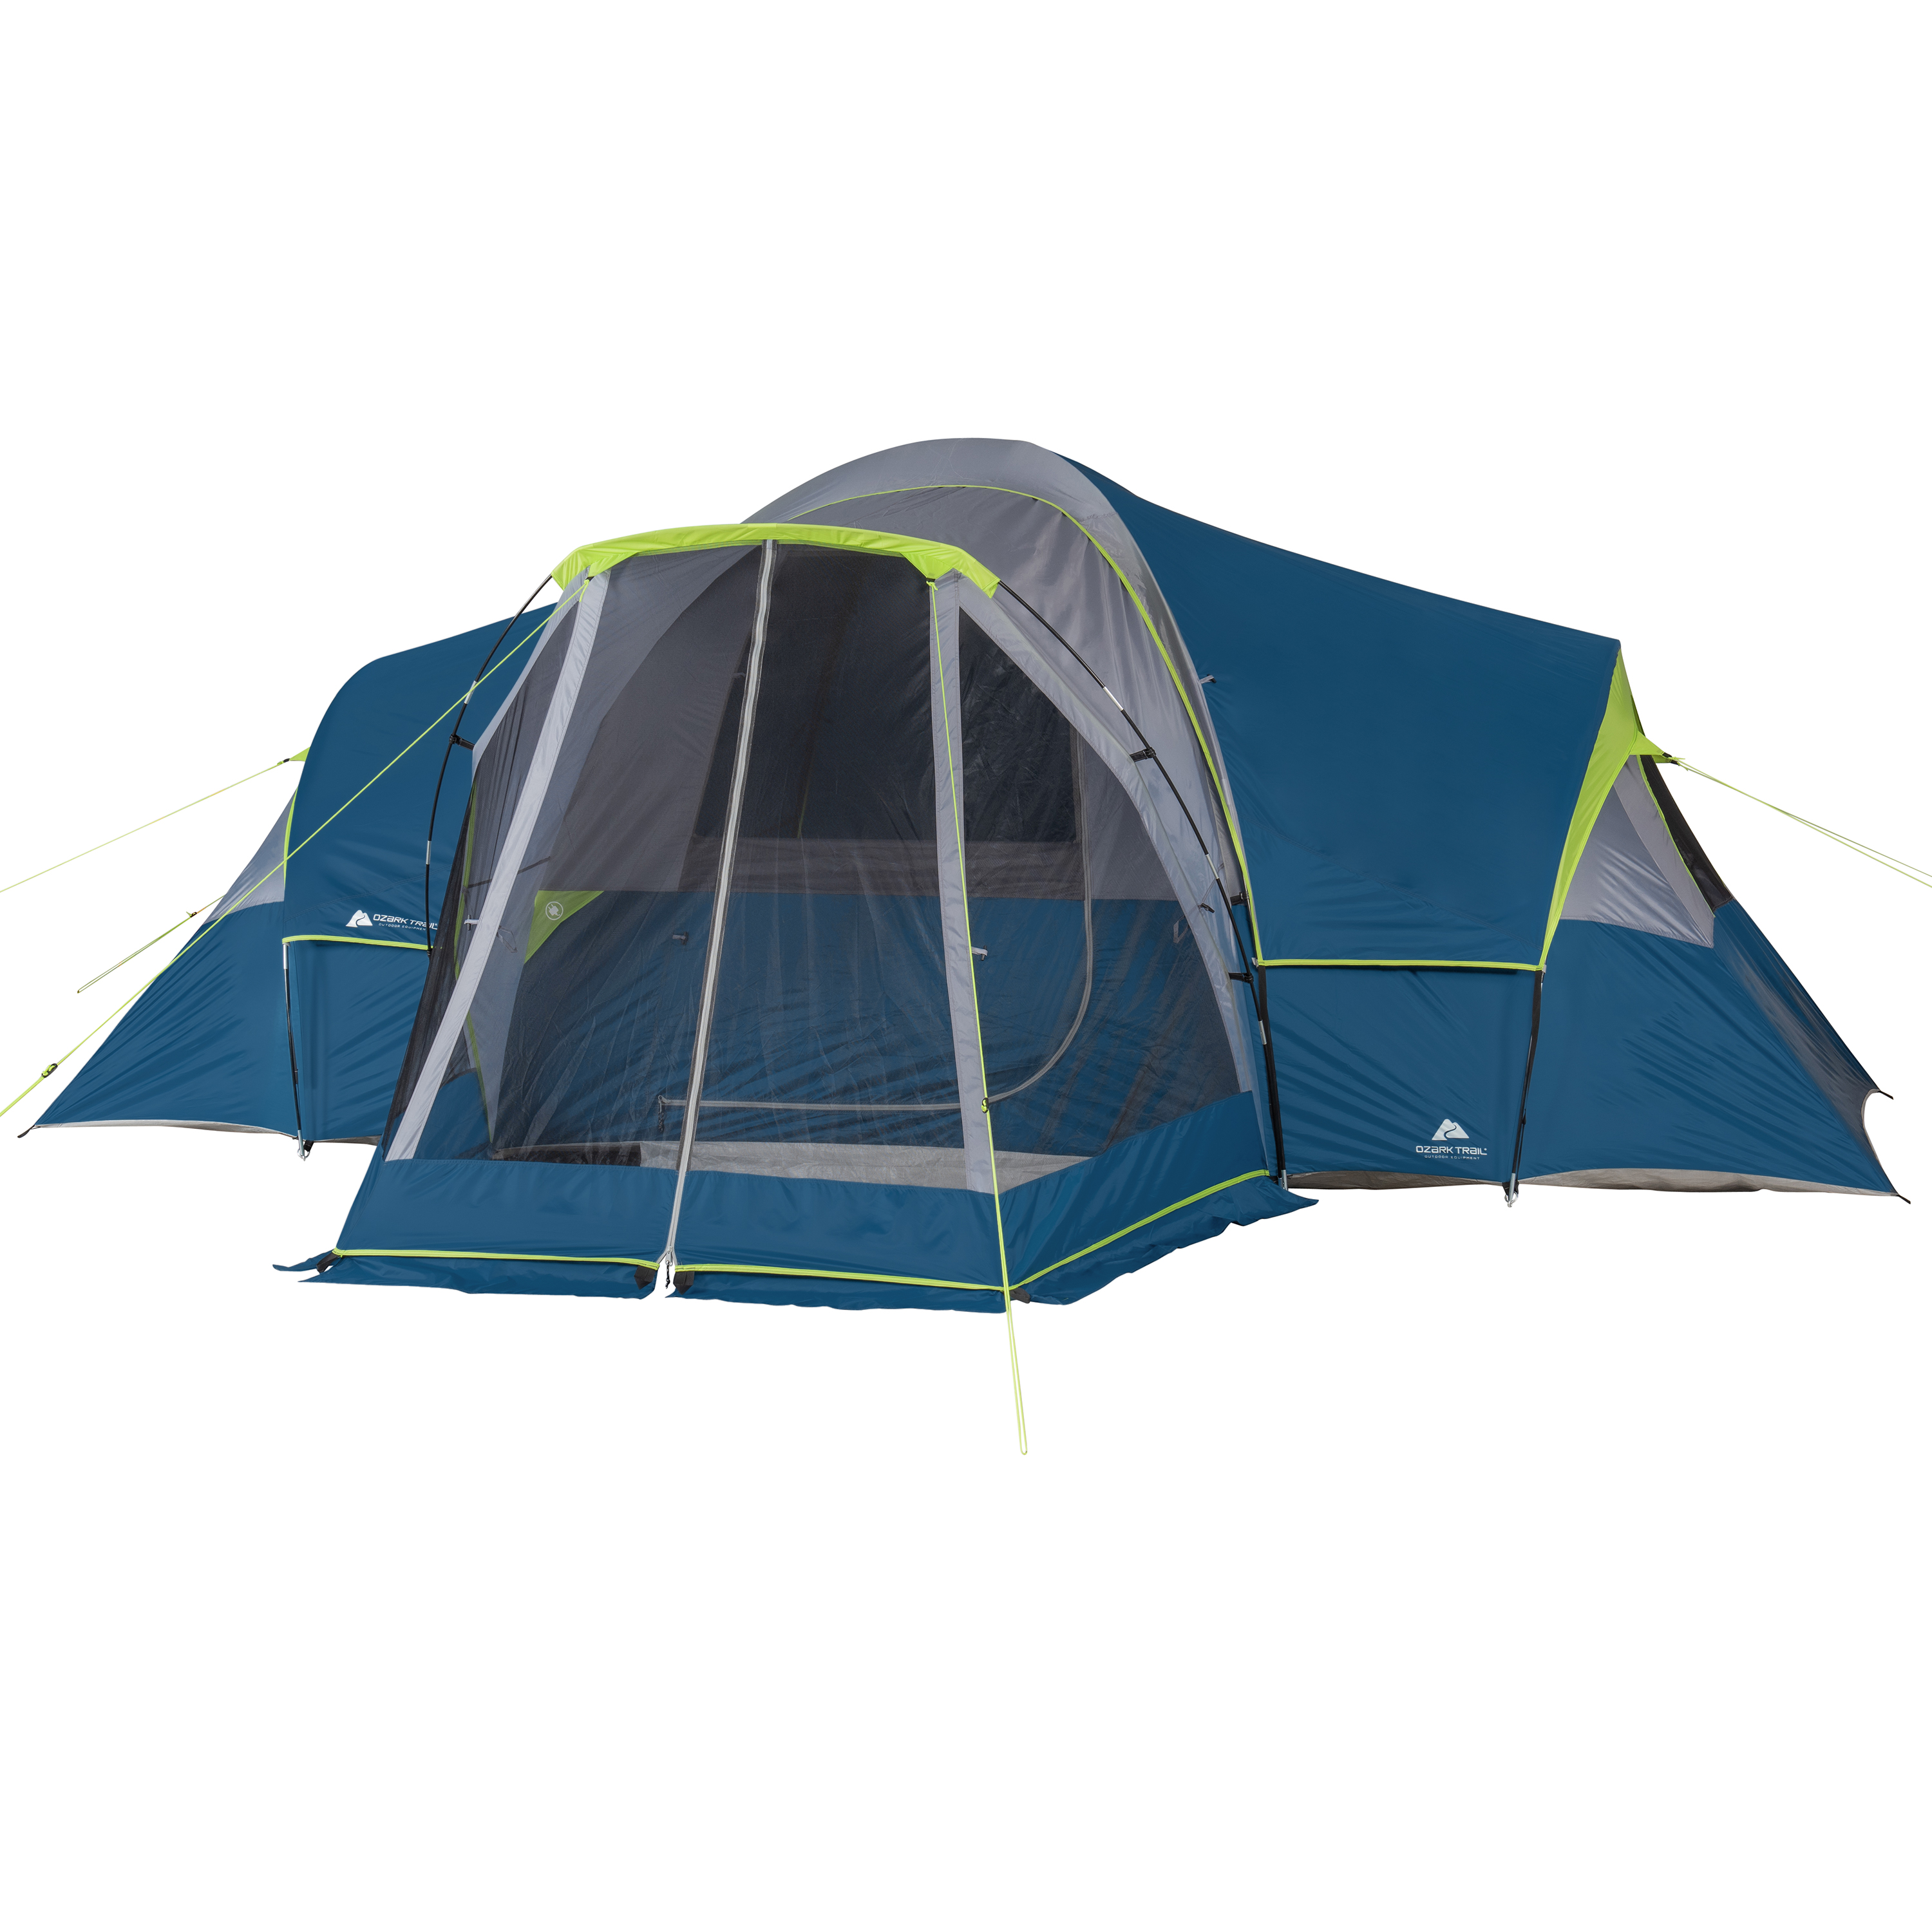 Ozark Trail 10-Person Modified Dome Tent with Screen Porch - image 1 of 13